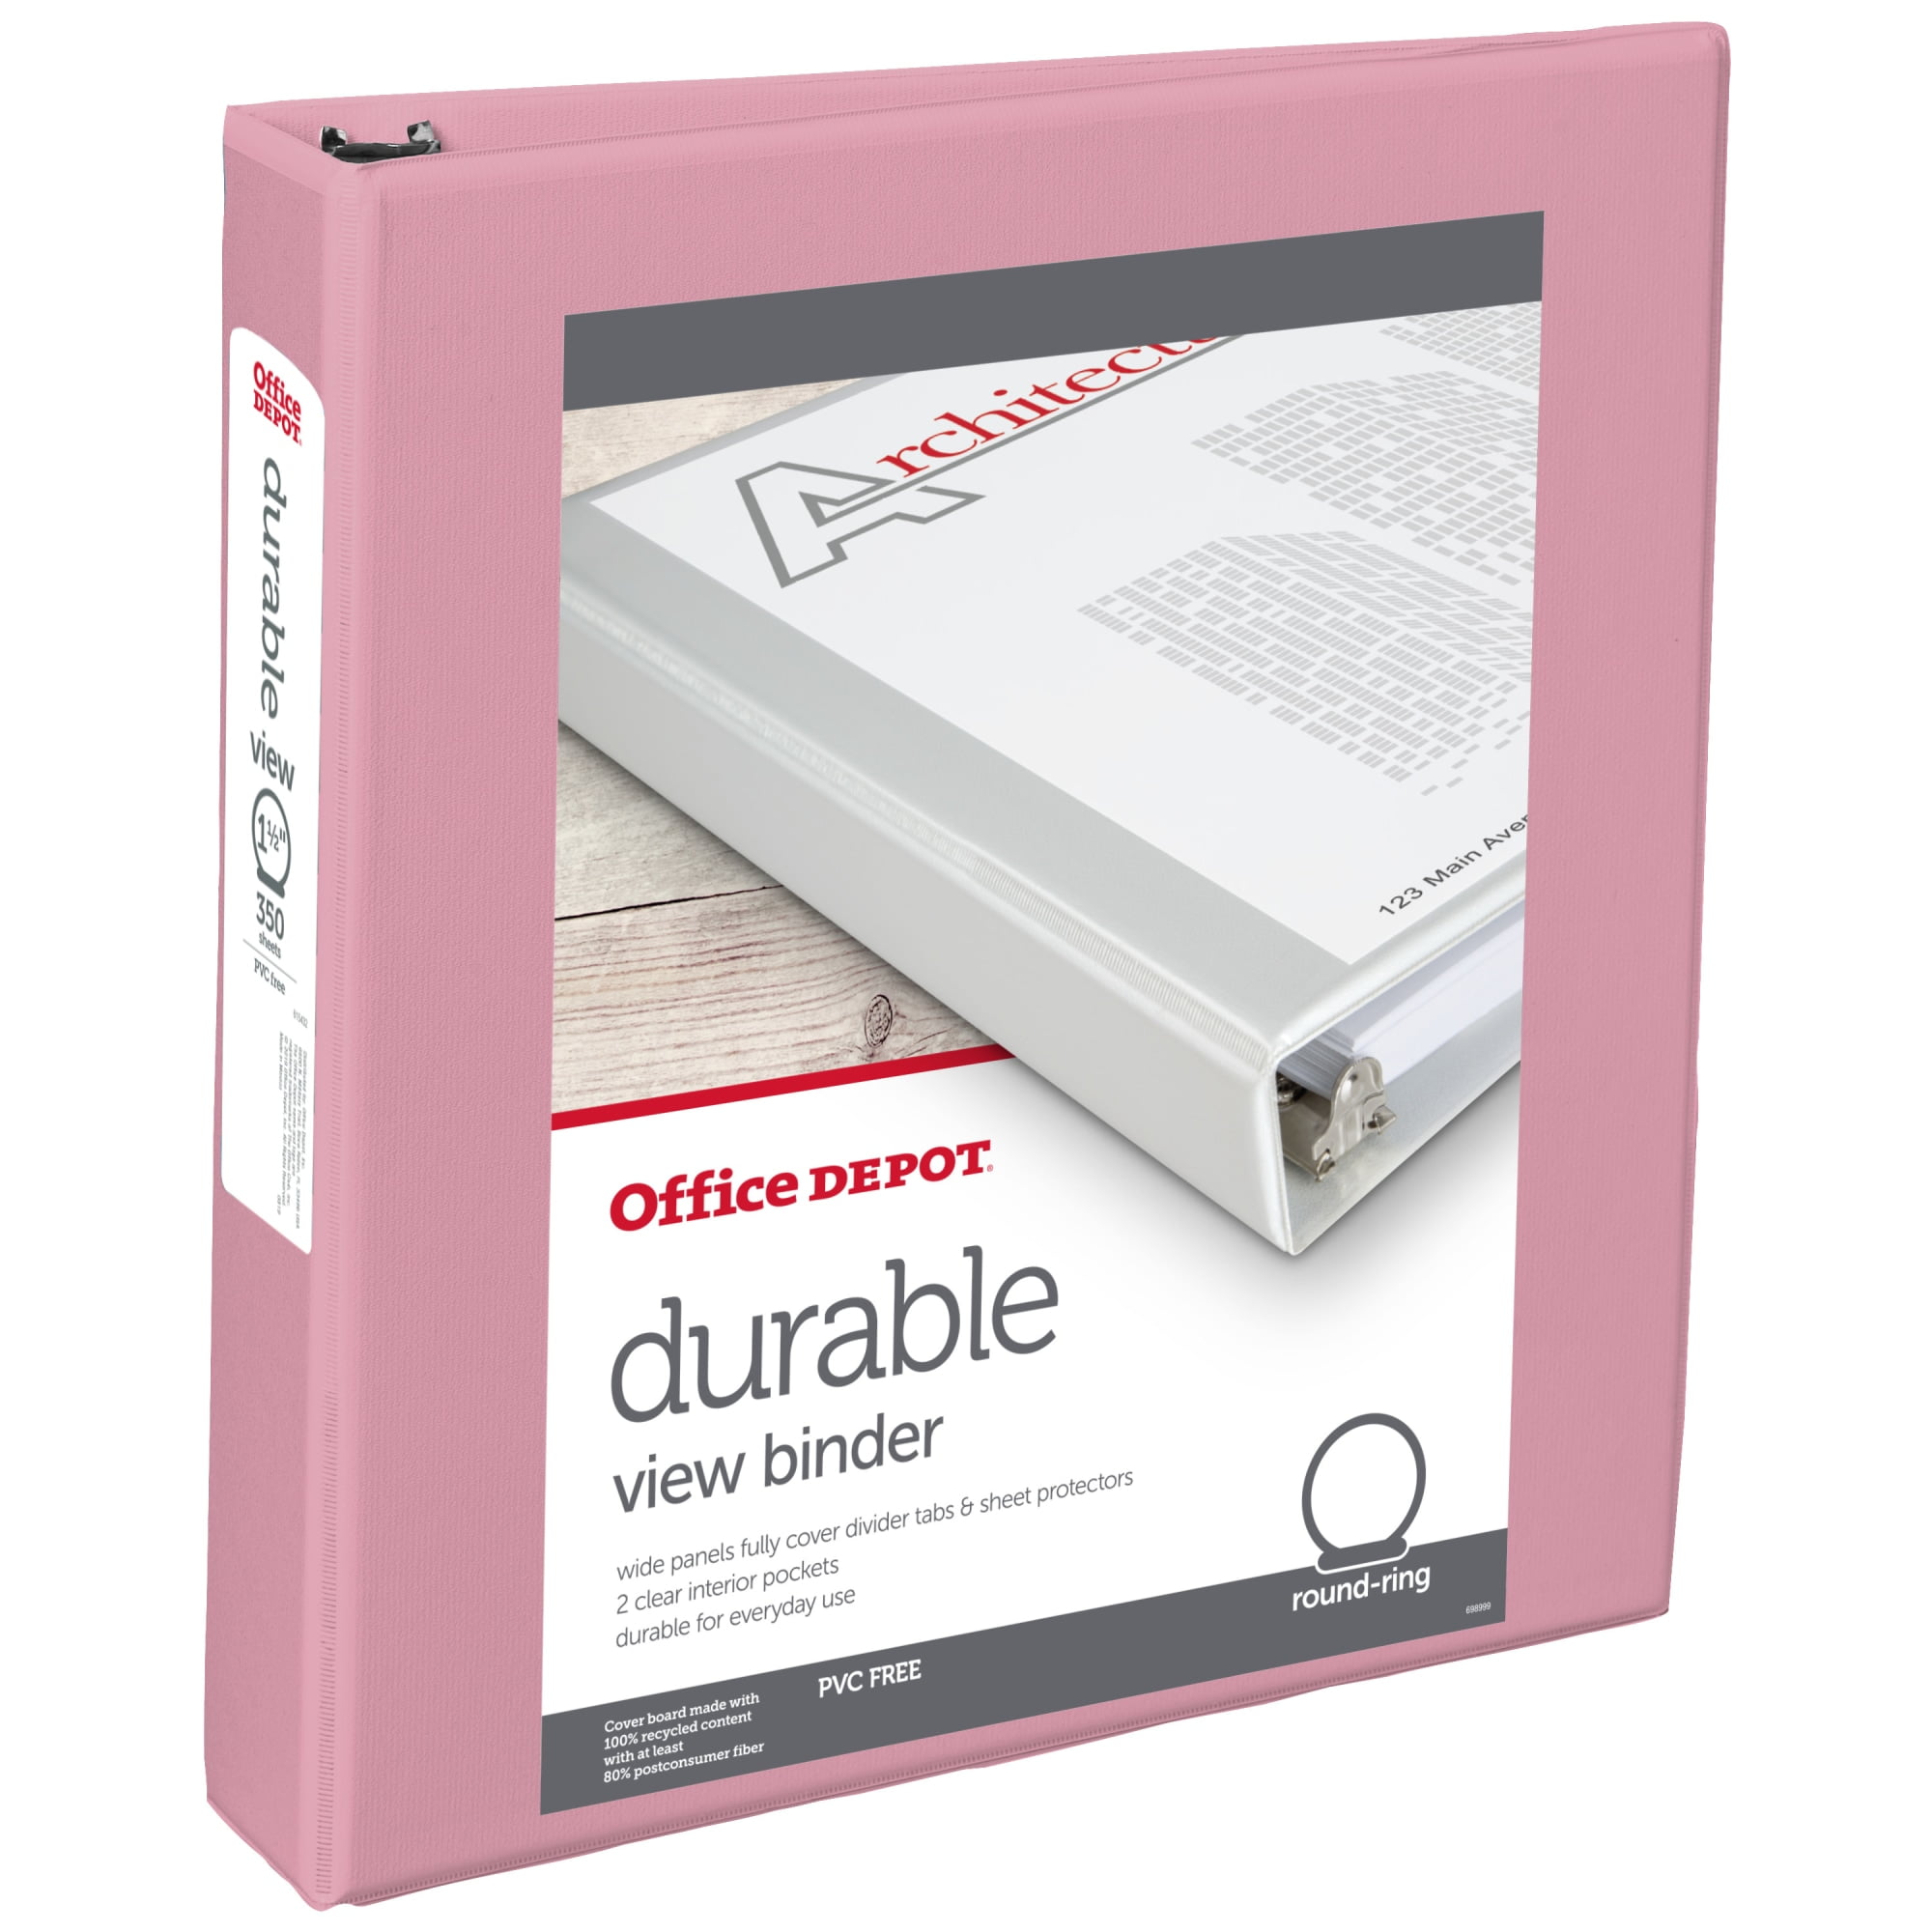 Office Depot® Brand Durable View Round-Ring Binders, 1-1/2" Round Rings, Recycled, Pink - Walmart.com